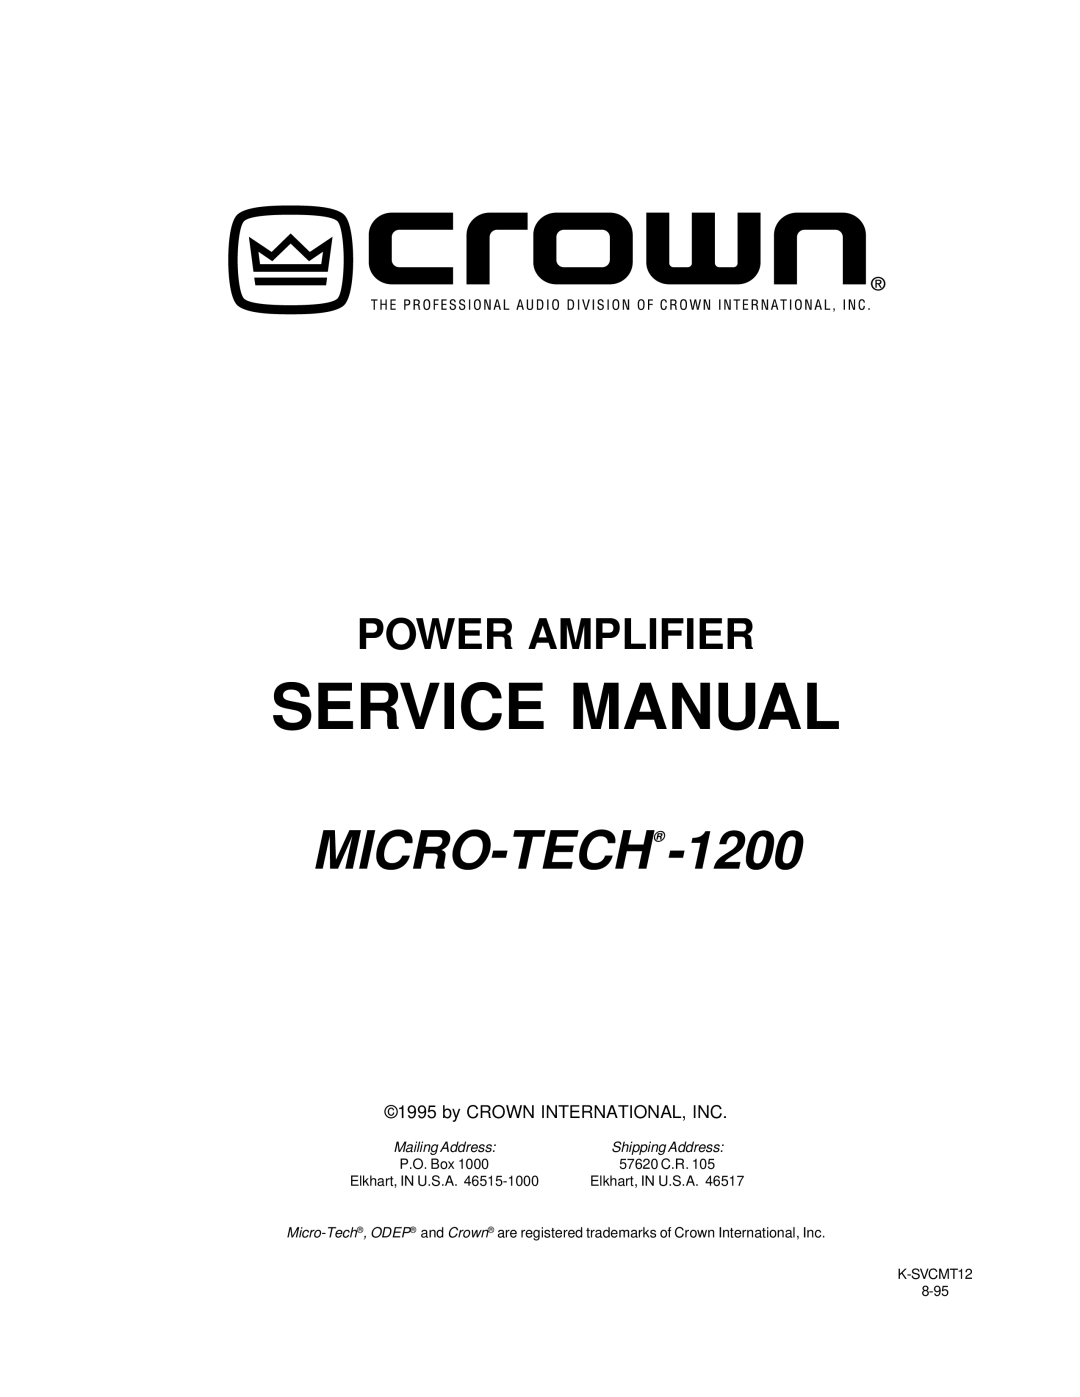 Crown Audio service manual MICRO-TECH-1200, Power Amplifier, Elkhart, IN U.S.A, K-SVCMT12, Mailing Address, P.O. Box 